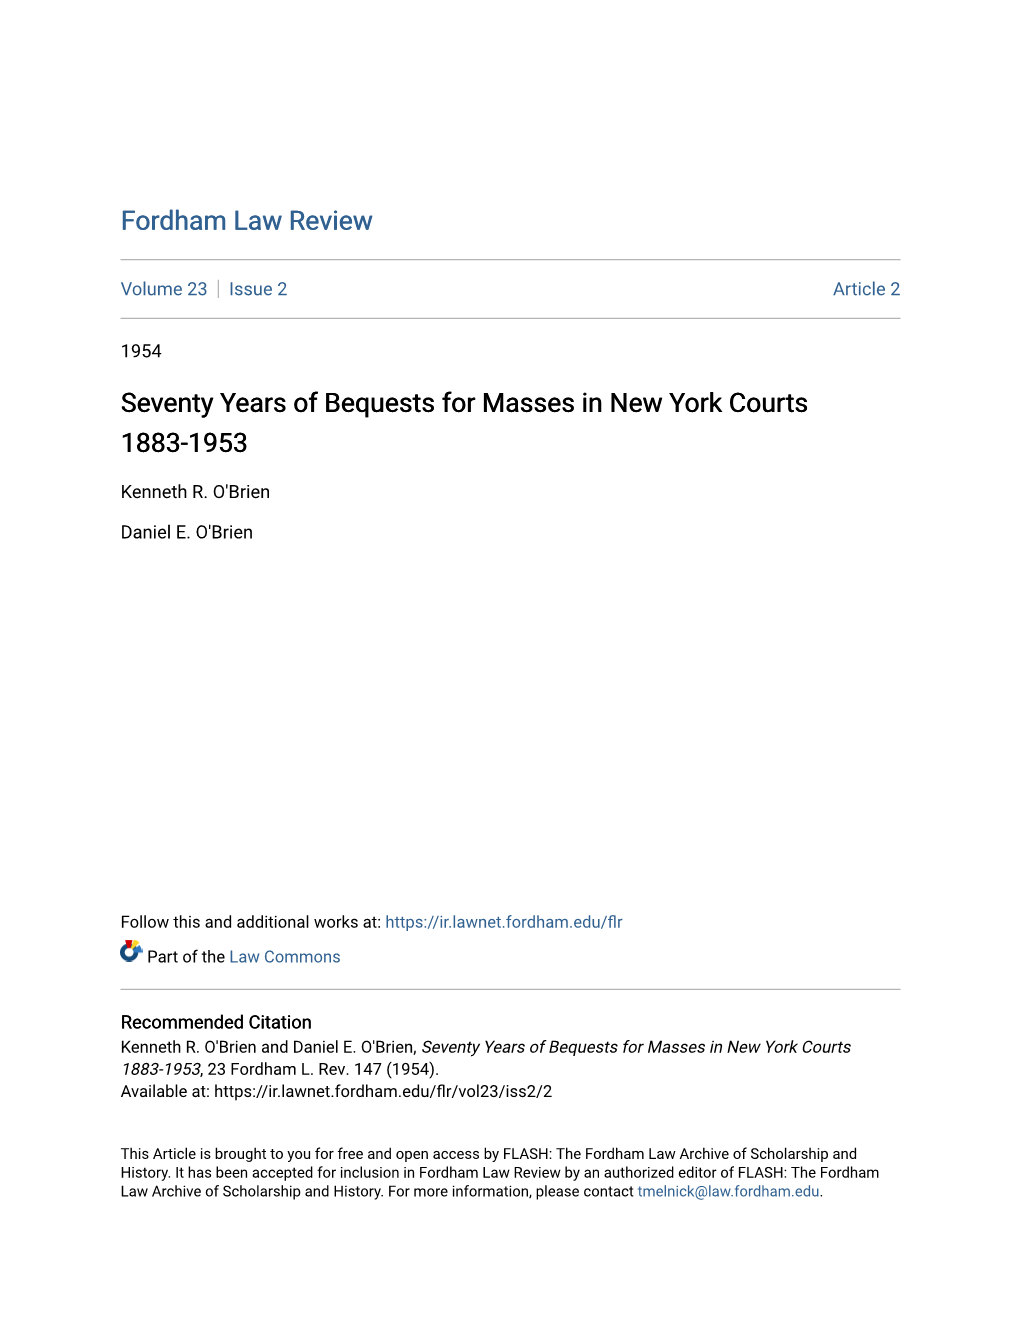 Seventy Years of Bequests for Masses in New York Courts 1883-1953